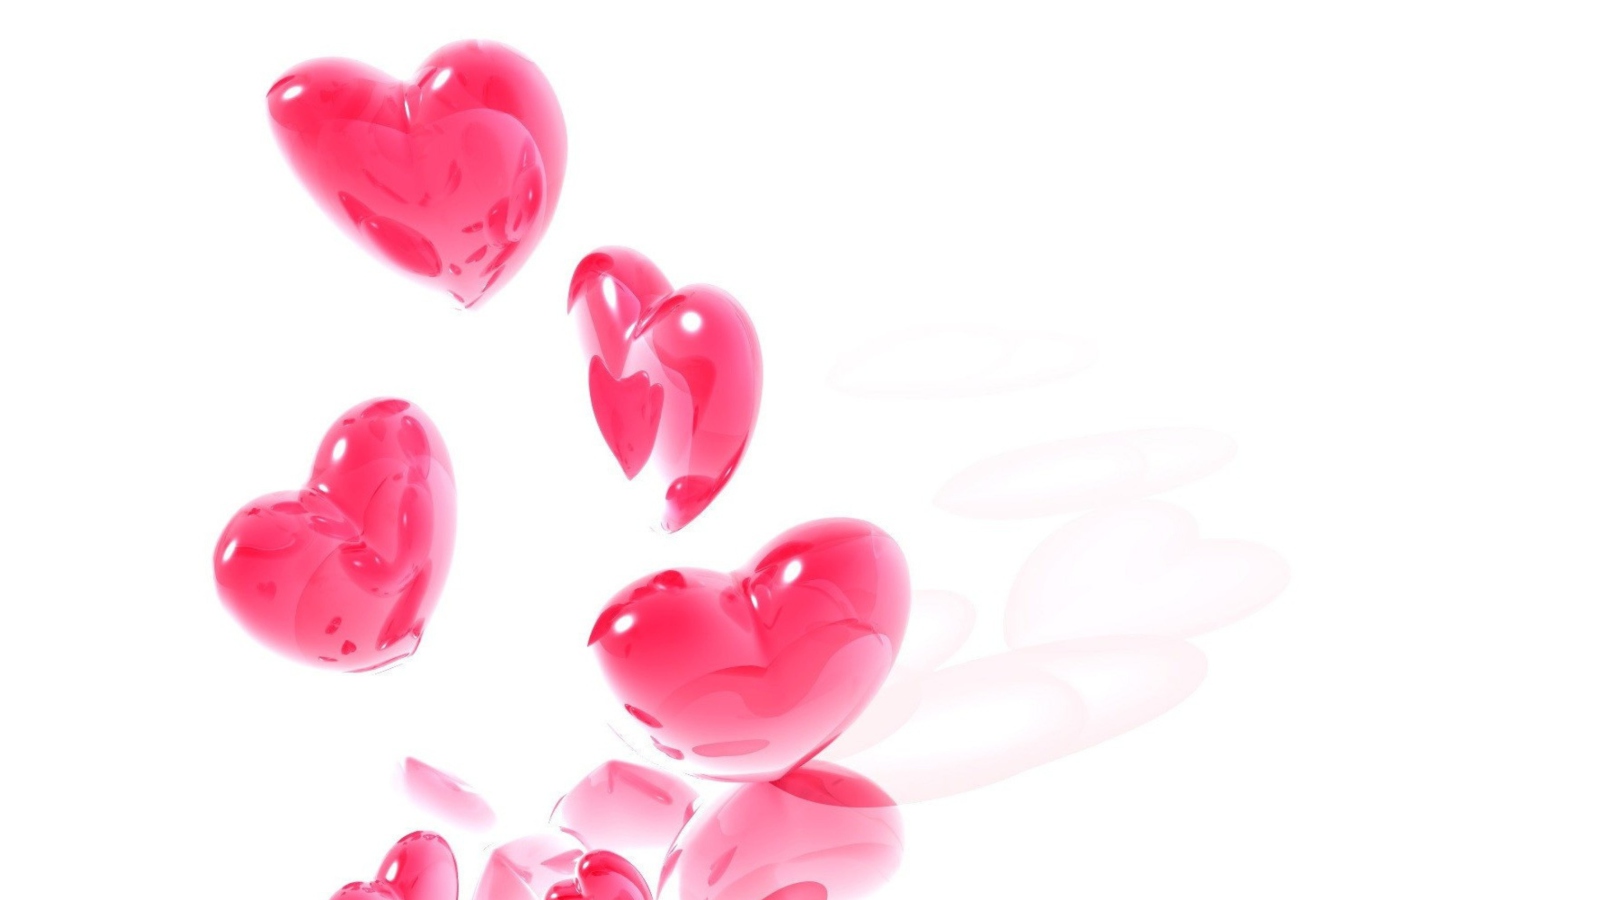 Abstract Pink Hearts On White wallpaper 1600x900